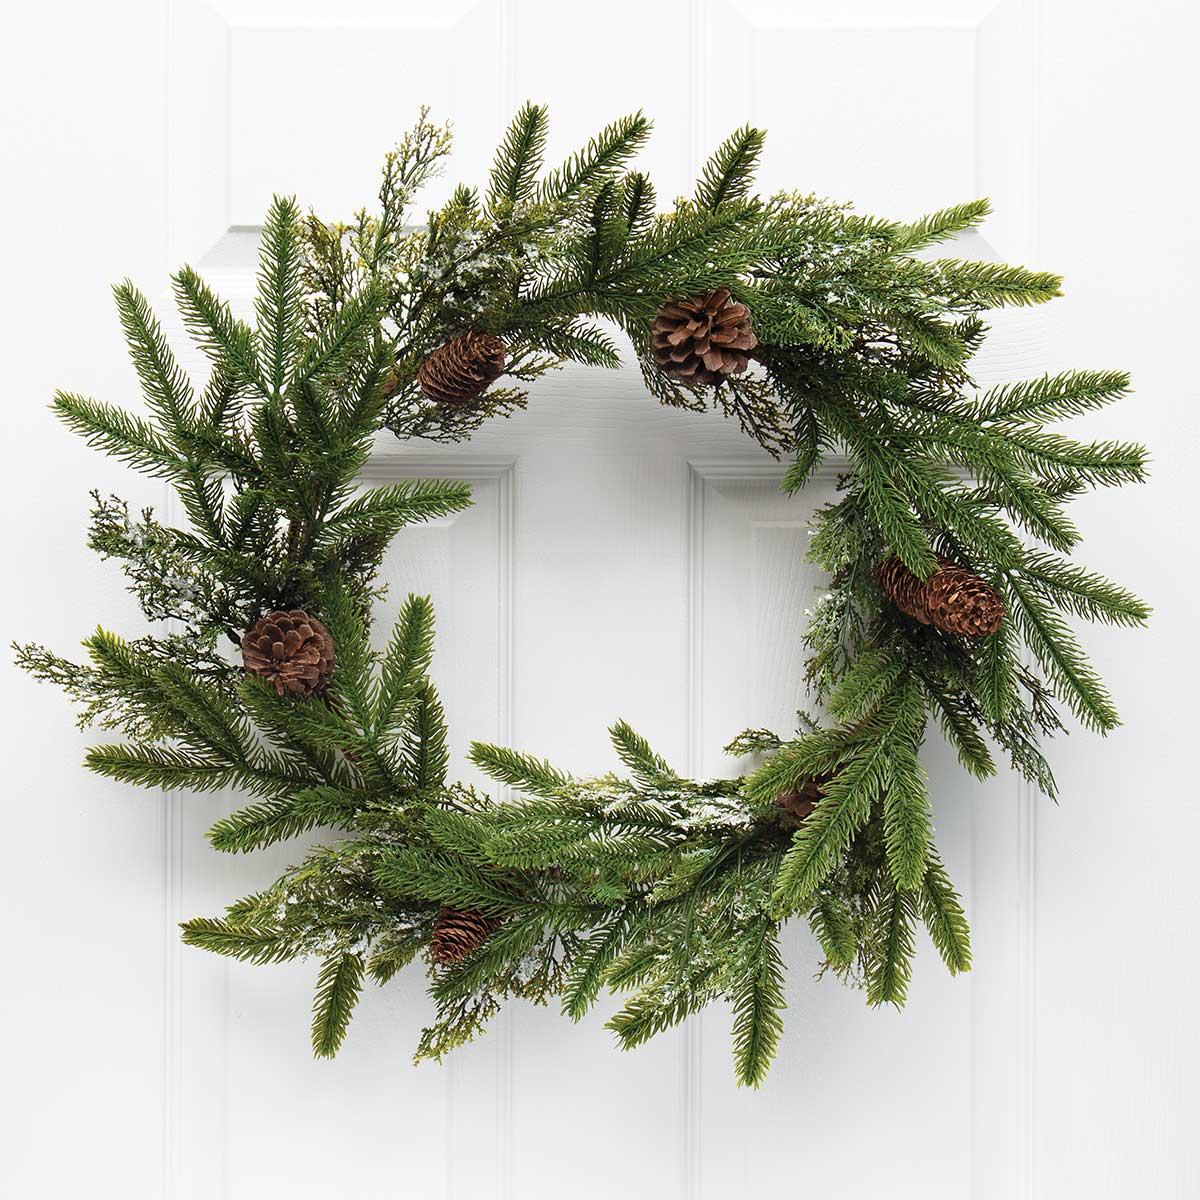 !NATURAL PINE MIX WREATH WITH SNOW/MICA CEDAR AND PINECONES 25"